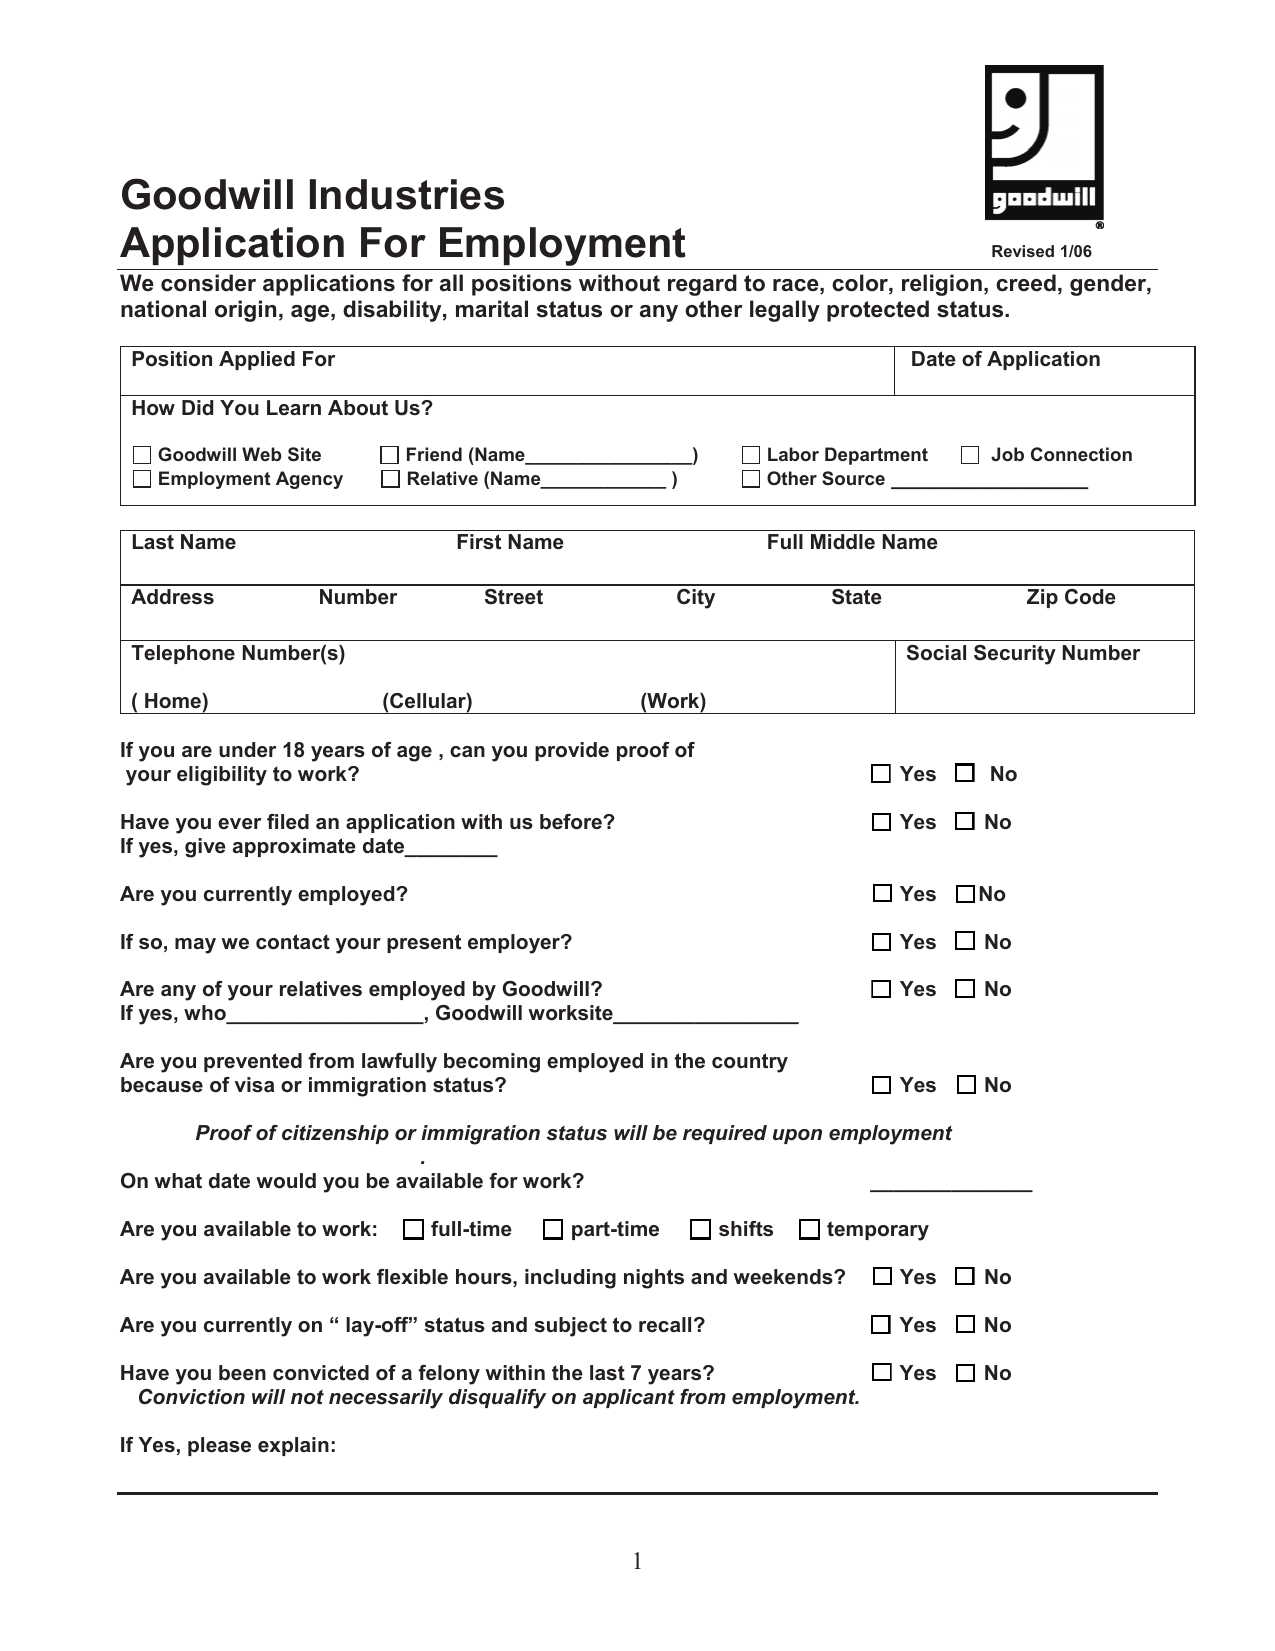 download-goodwill-job-application-form-careers-pdf-freedownloads